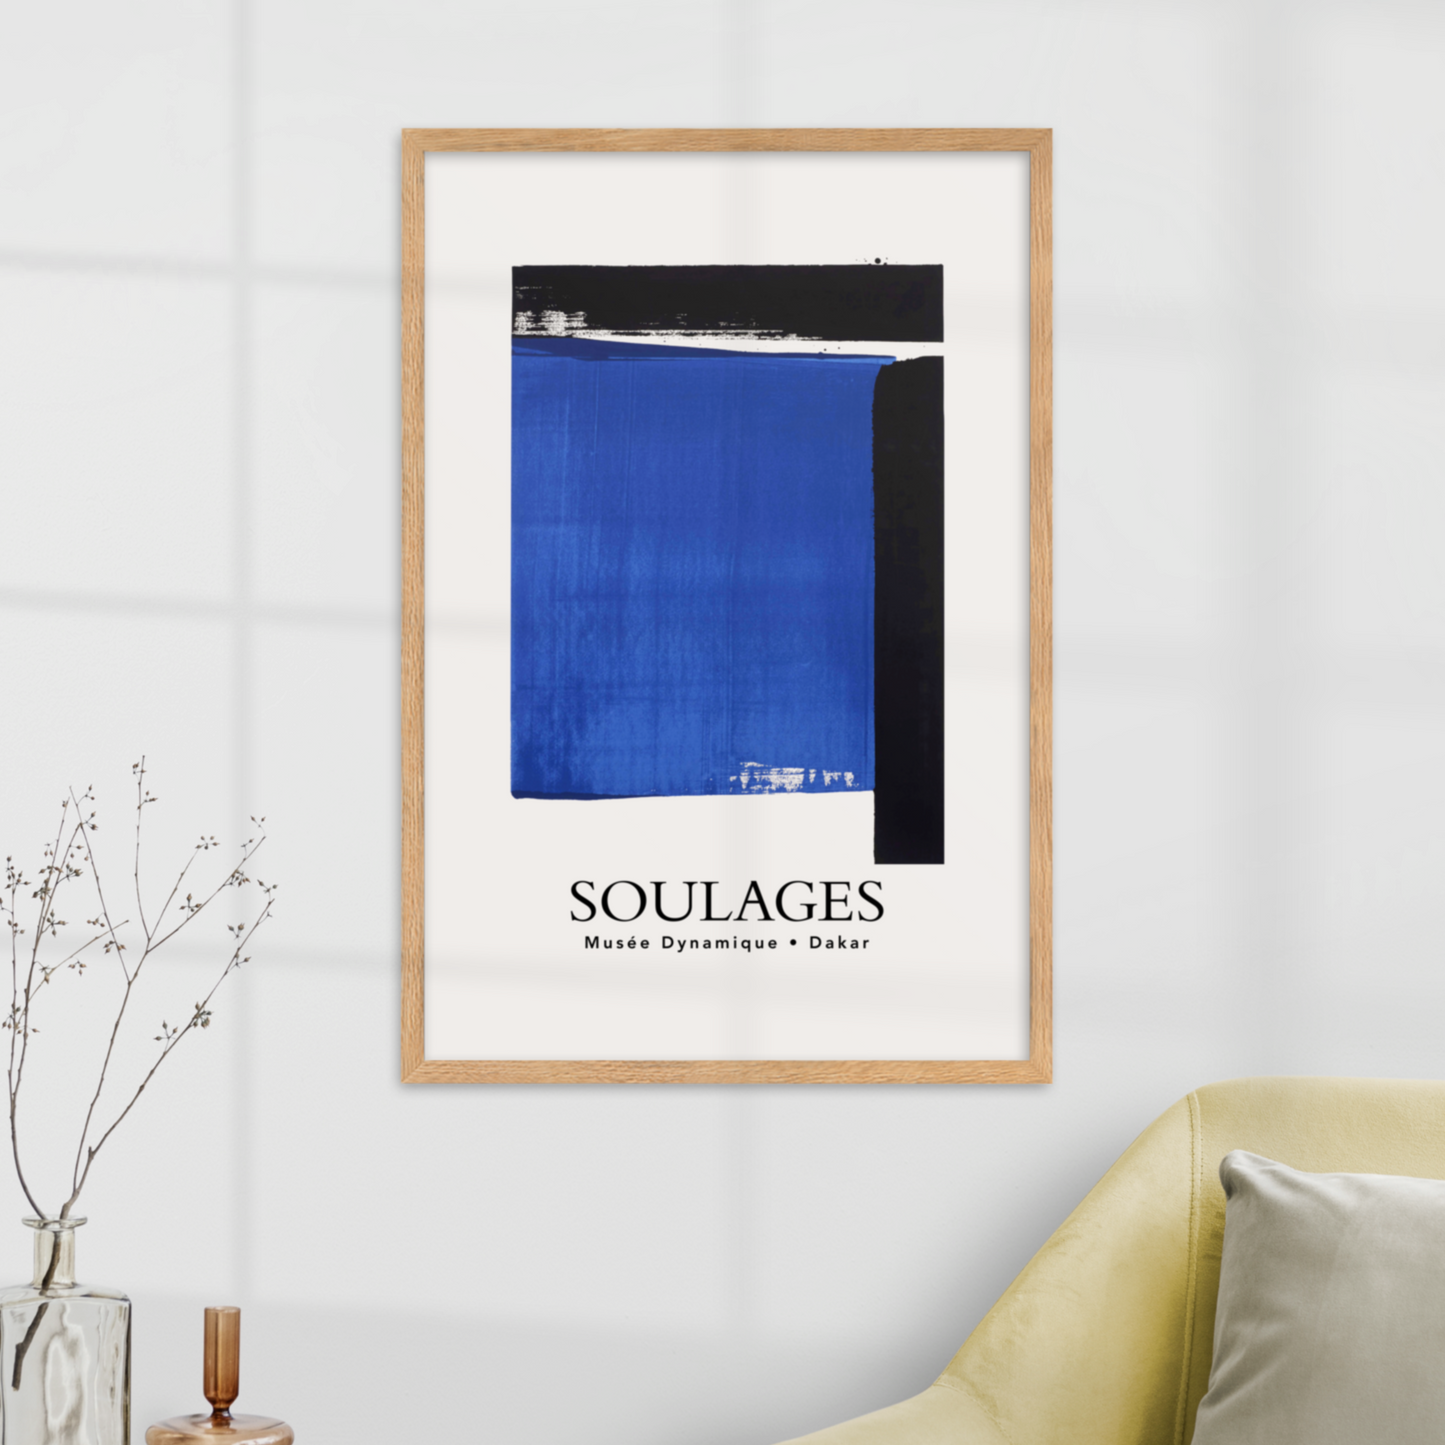 Soulages Sérigraphie Exhibition Poster - THE WALL SNOB